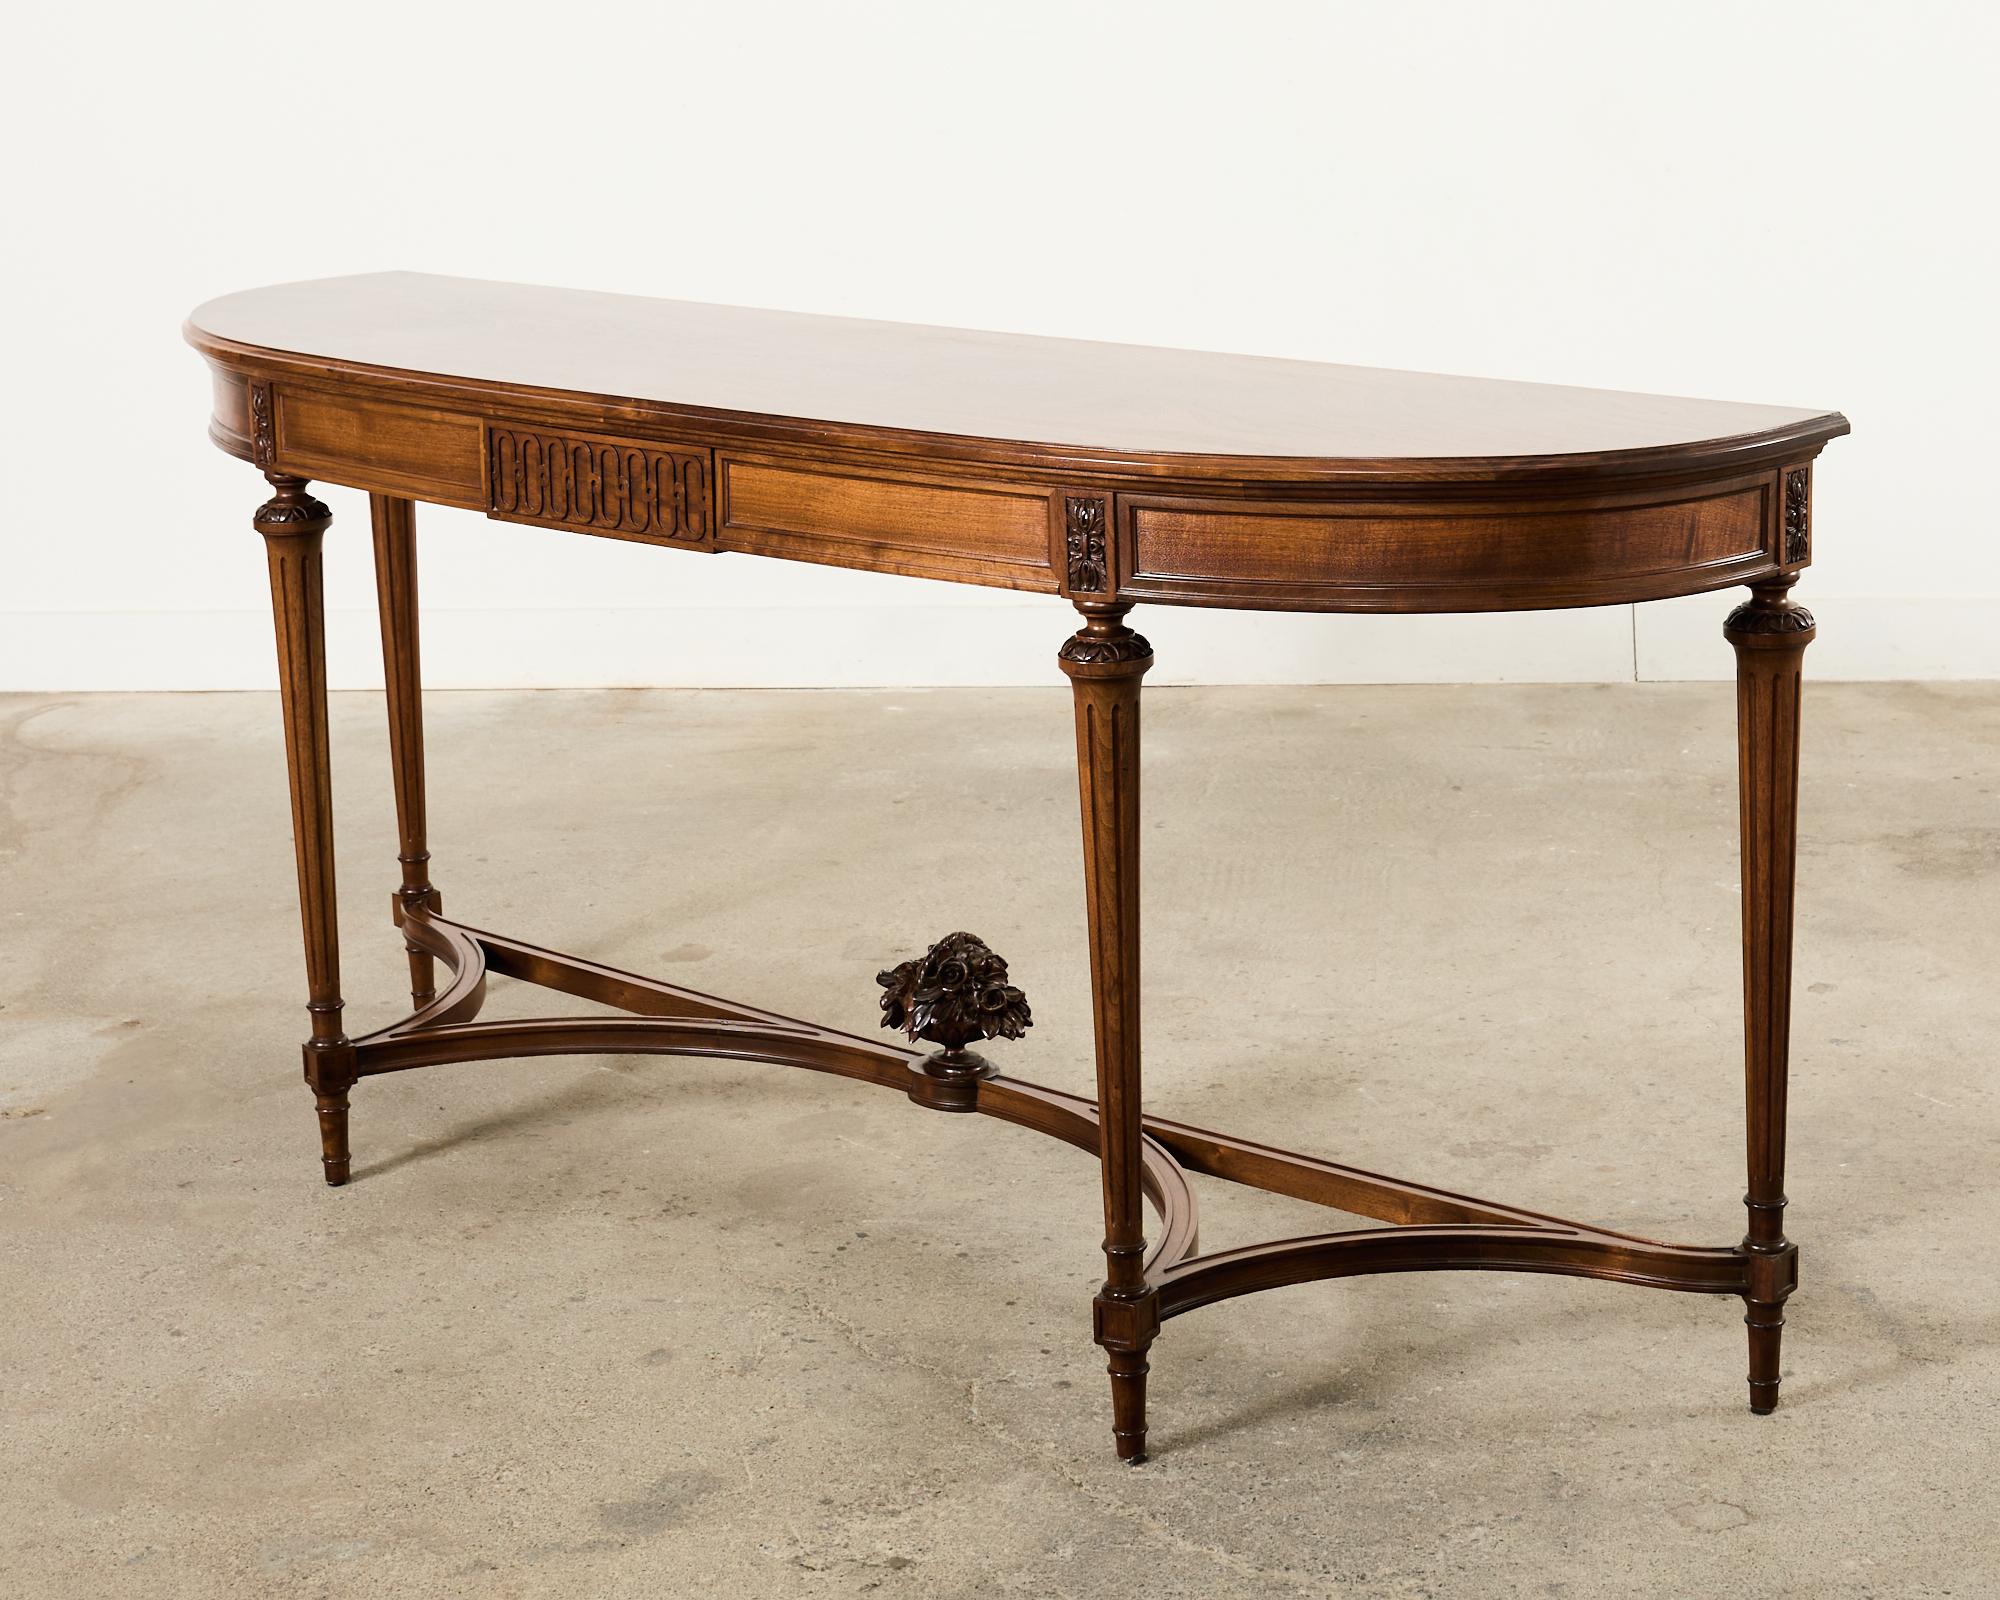 Grand French Louis XVI Style Mahogany Demilune Console Server For Sale 13